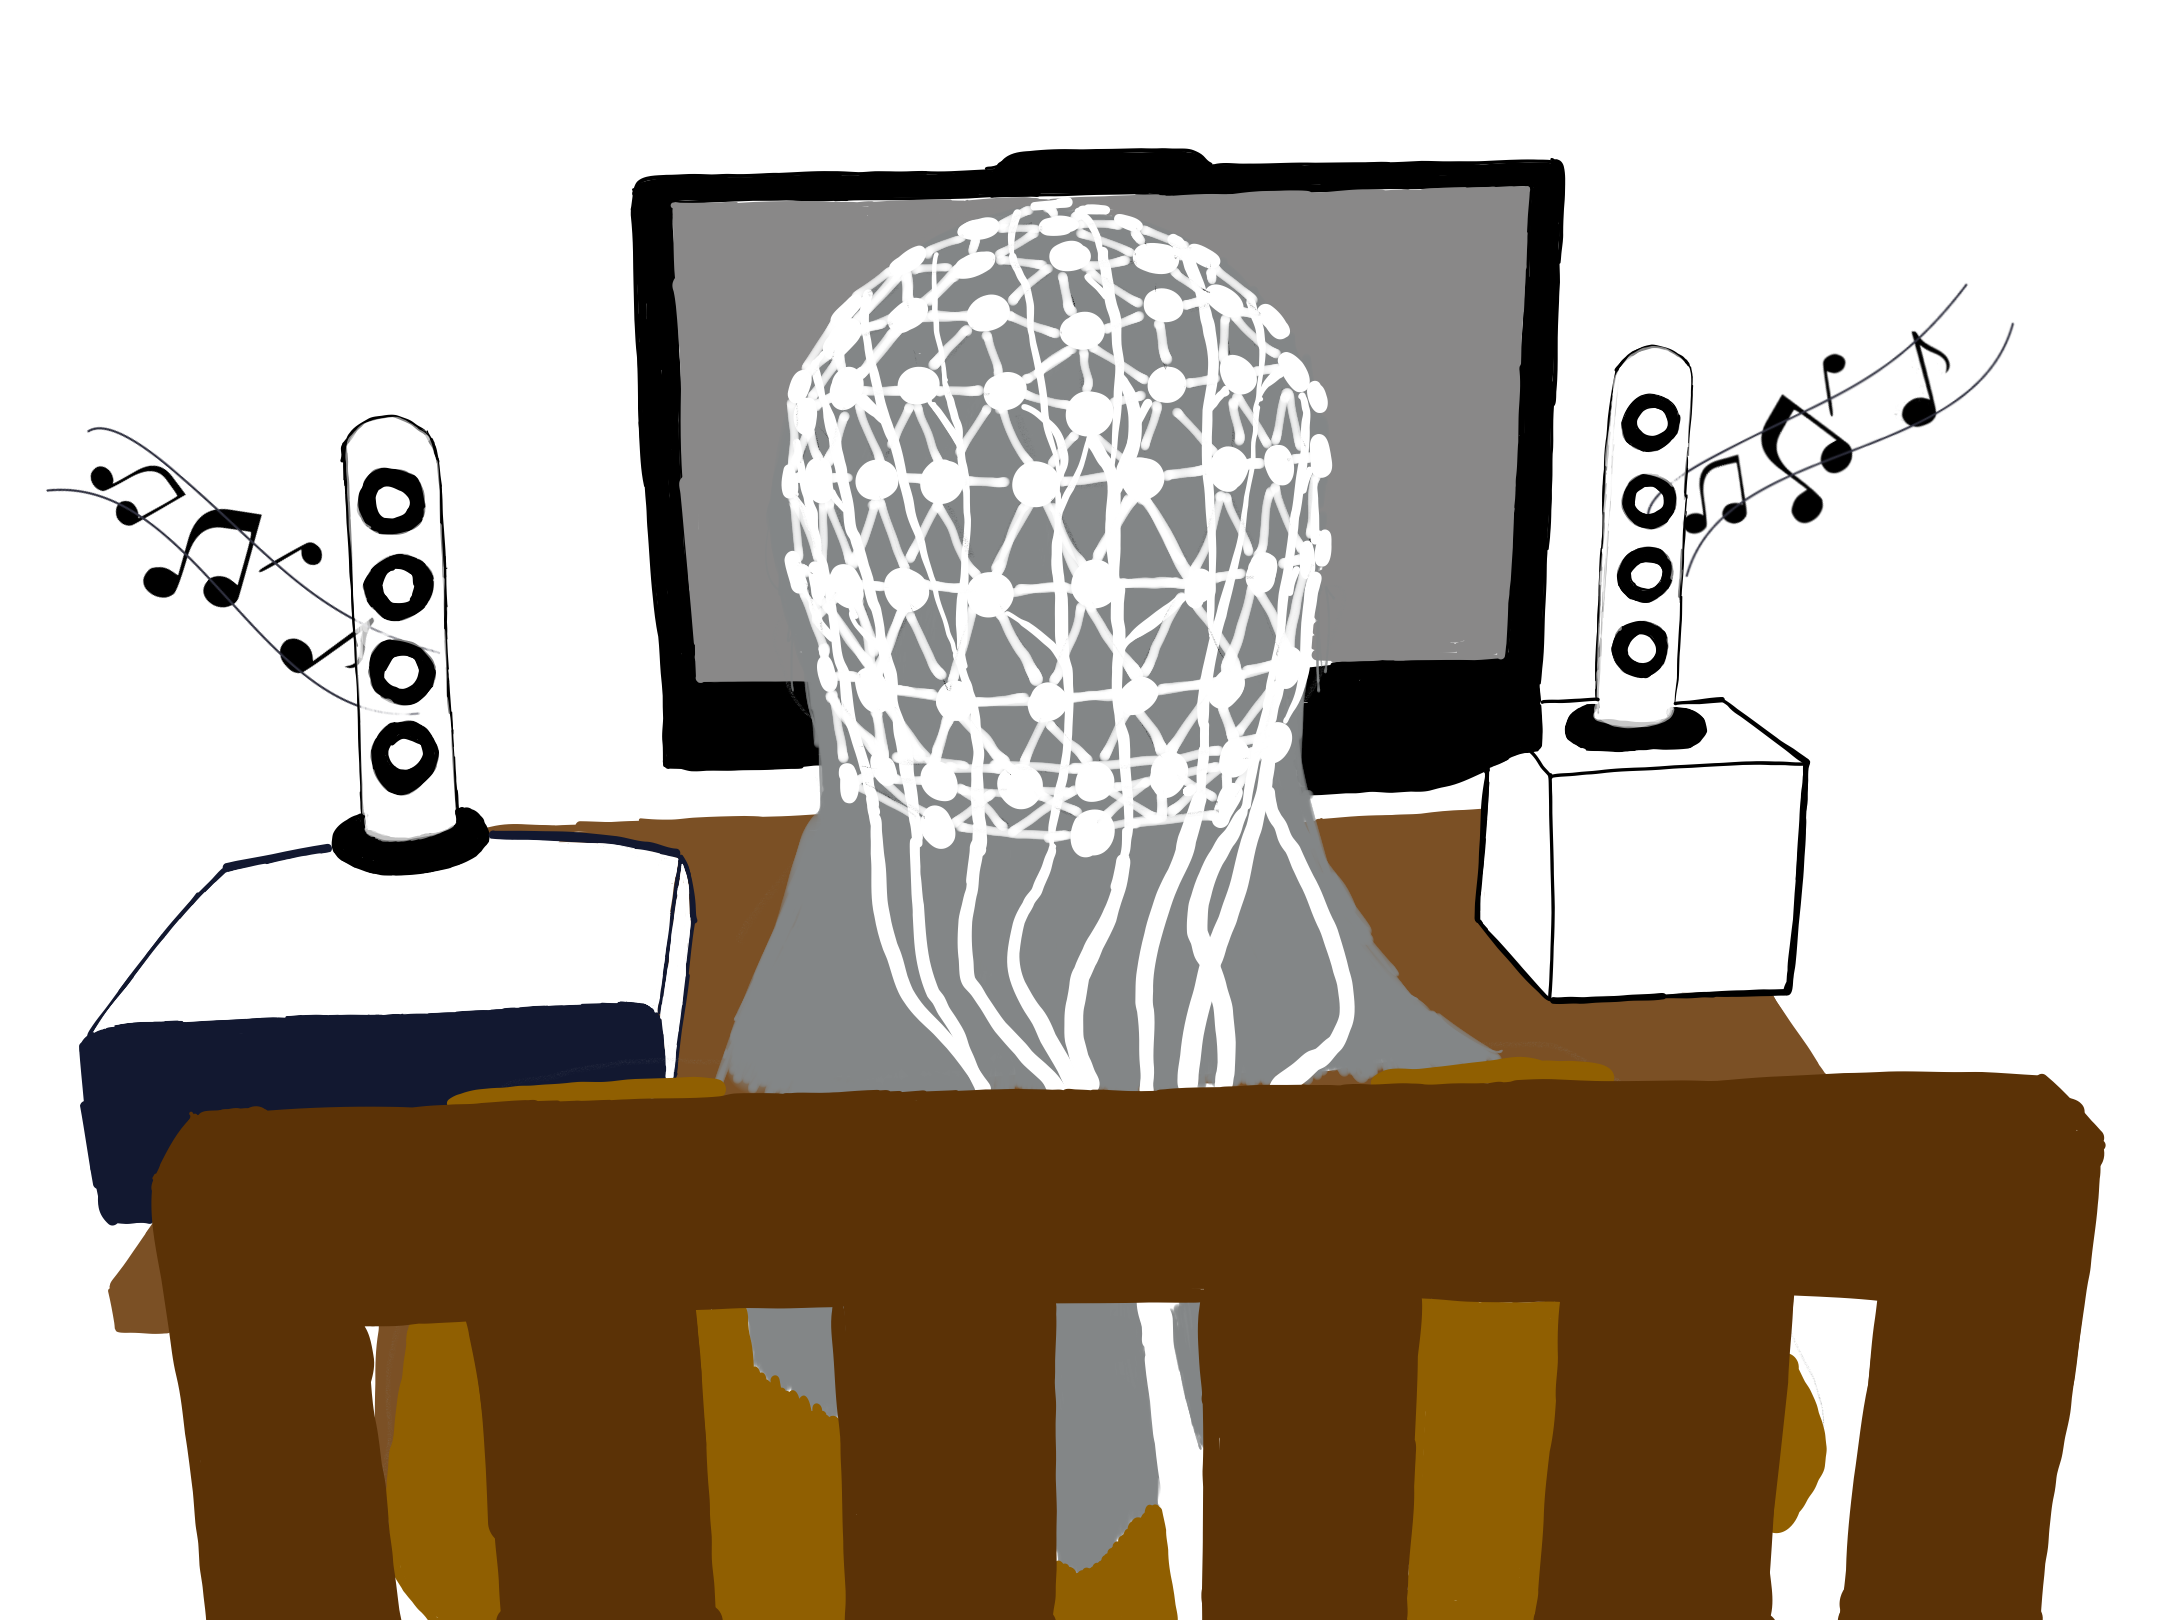 eeg-music-experiment.png